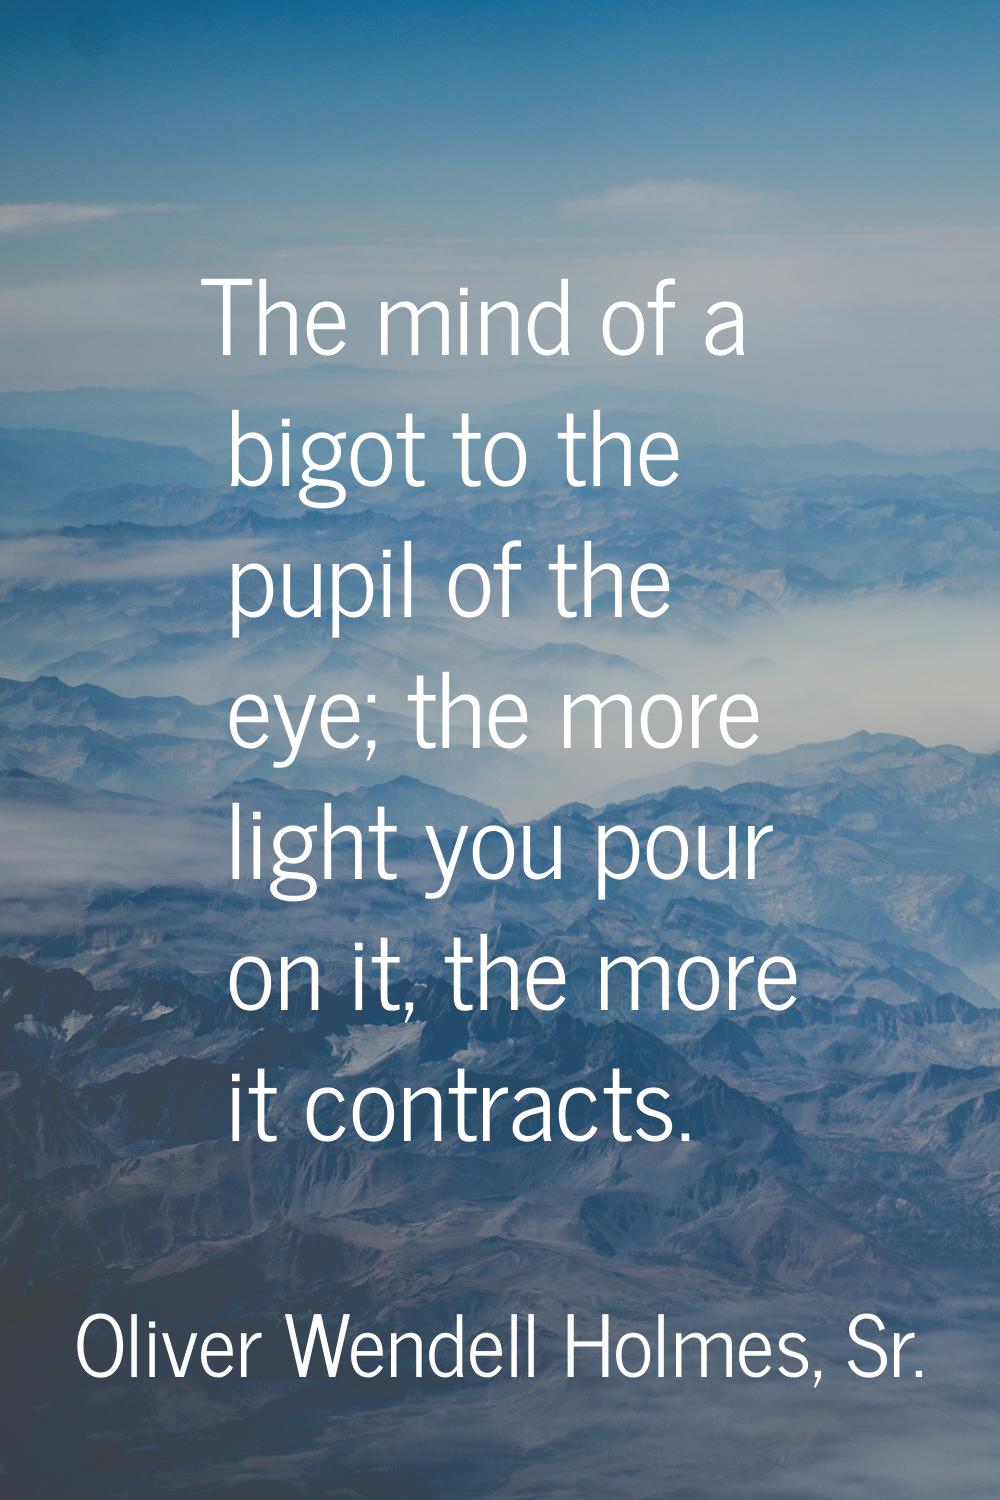 The mind of a bigot to the pupil of the eye; the more light you pour on it, the more it contracts.